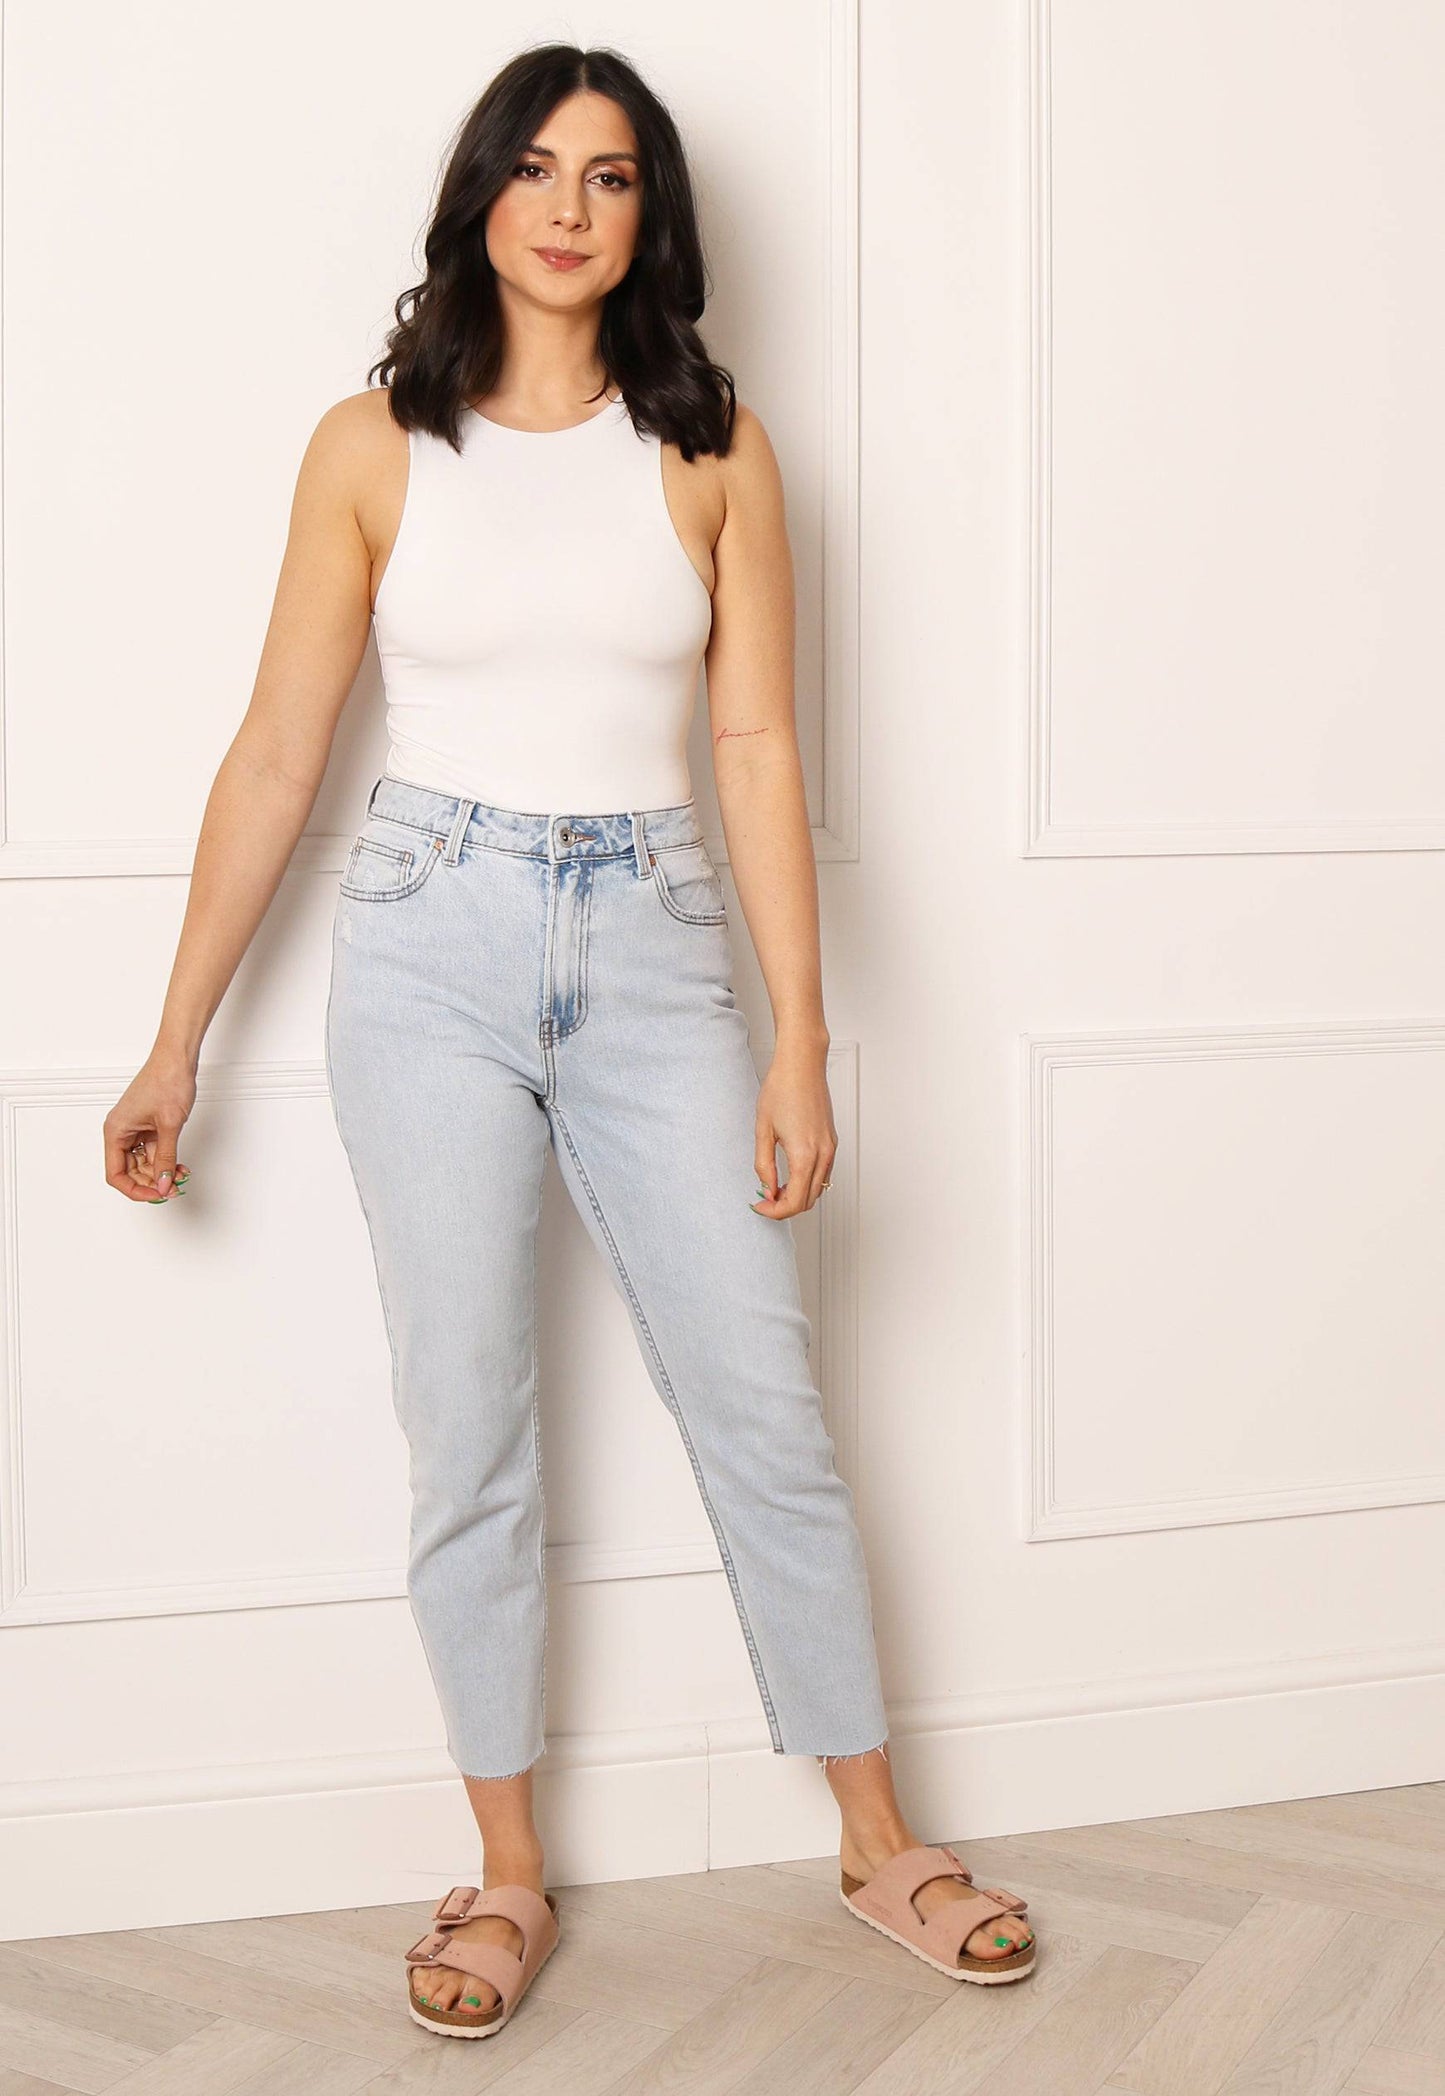 ONLY Emily High Waisted Straight Leg Ankle Grazer Jeans in Light Blue Wash - concretebartops